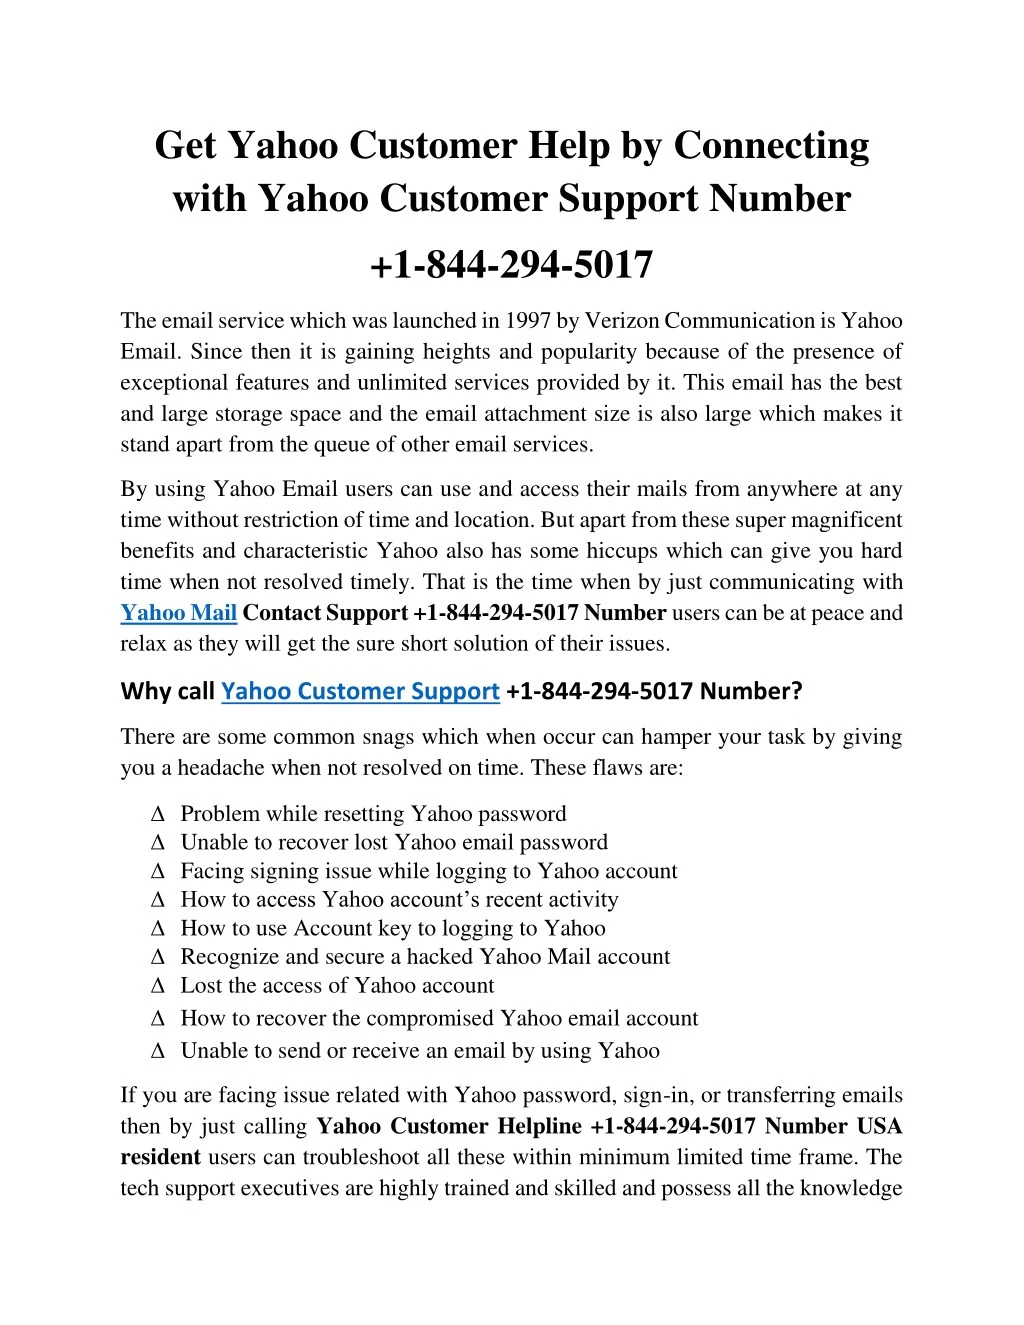 get yahoo customer help by connecting with yahoo